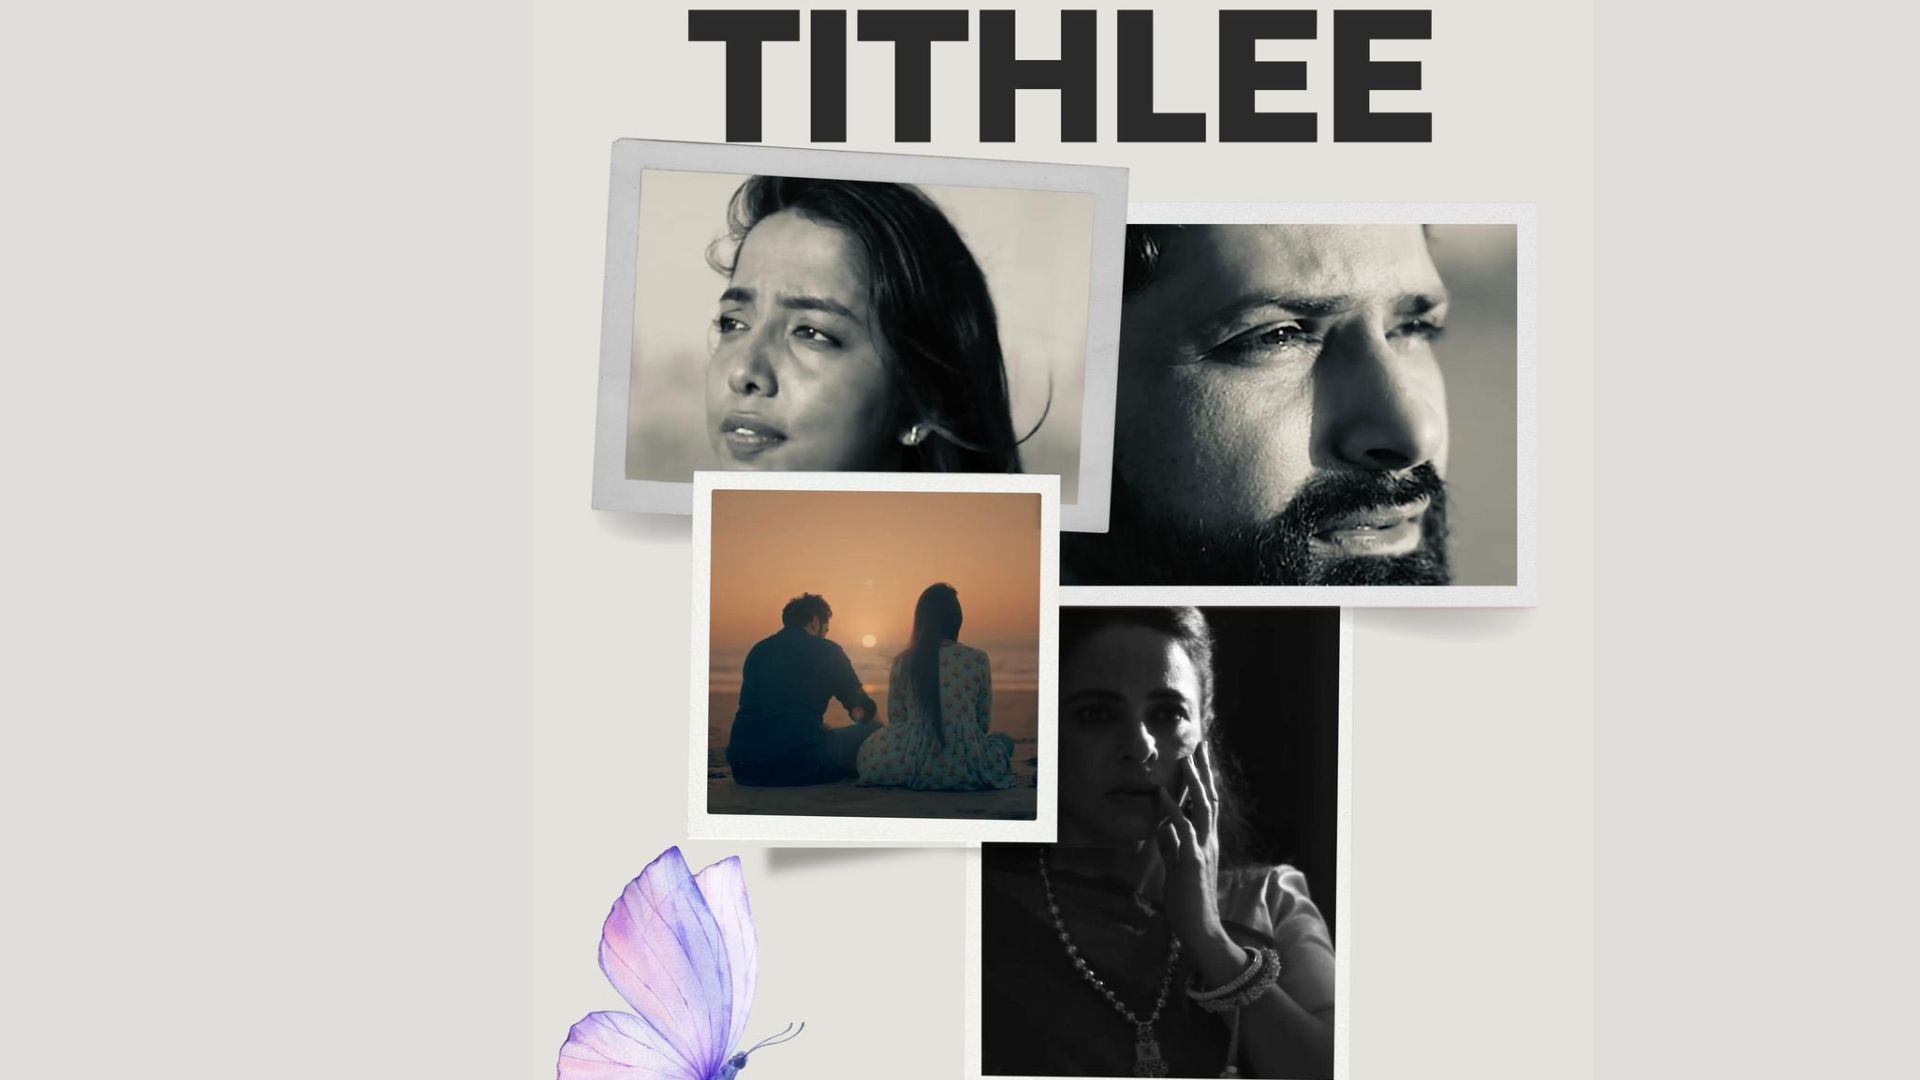 Namashi Chakraborty, the son of Mithun Chakraborty, has released his second short film titled 'Tithlee', which is now available for streaming.